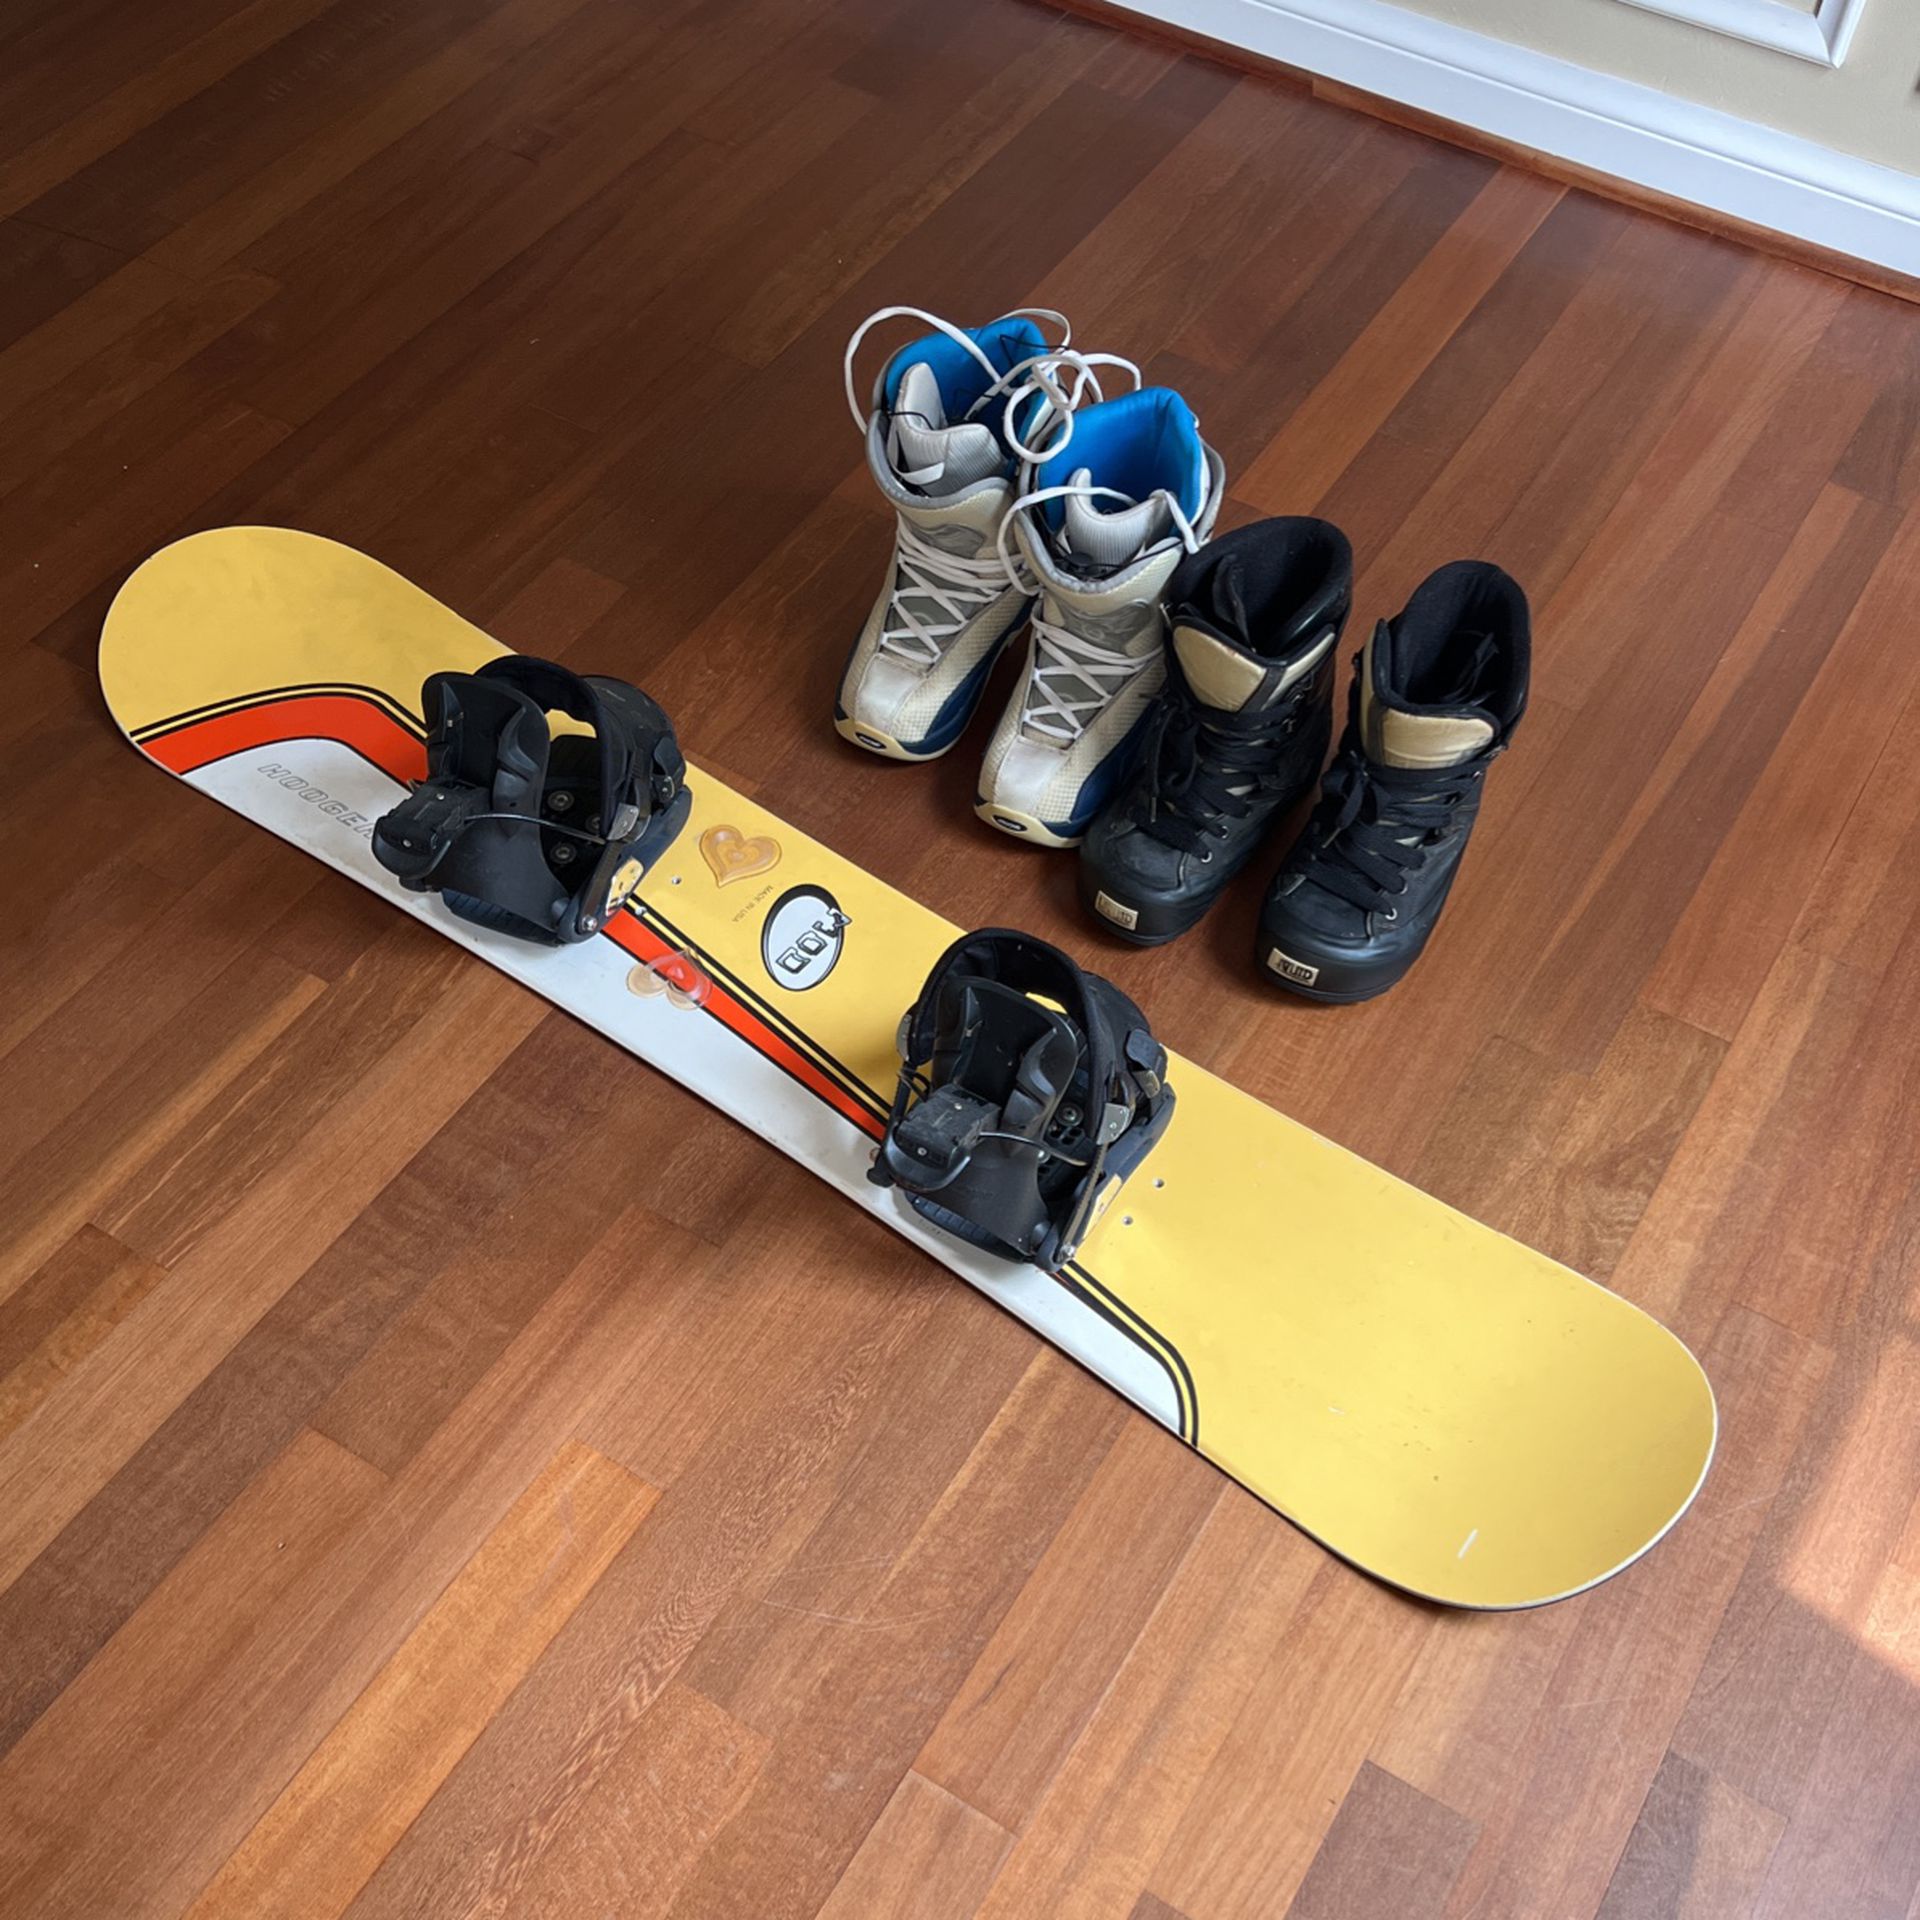 Hooger Mod 144 Snowboard With Boots